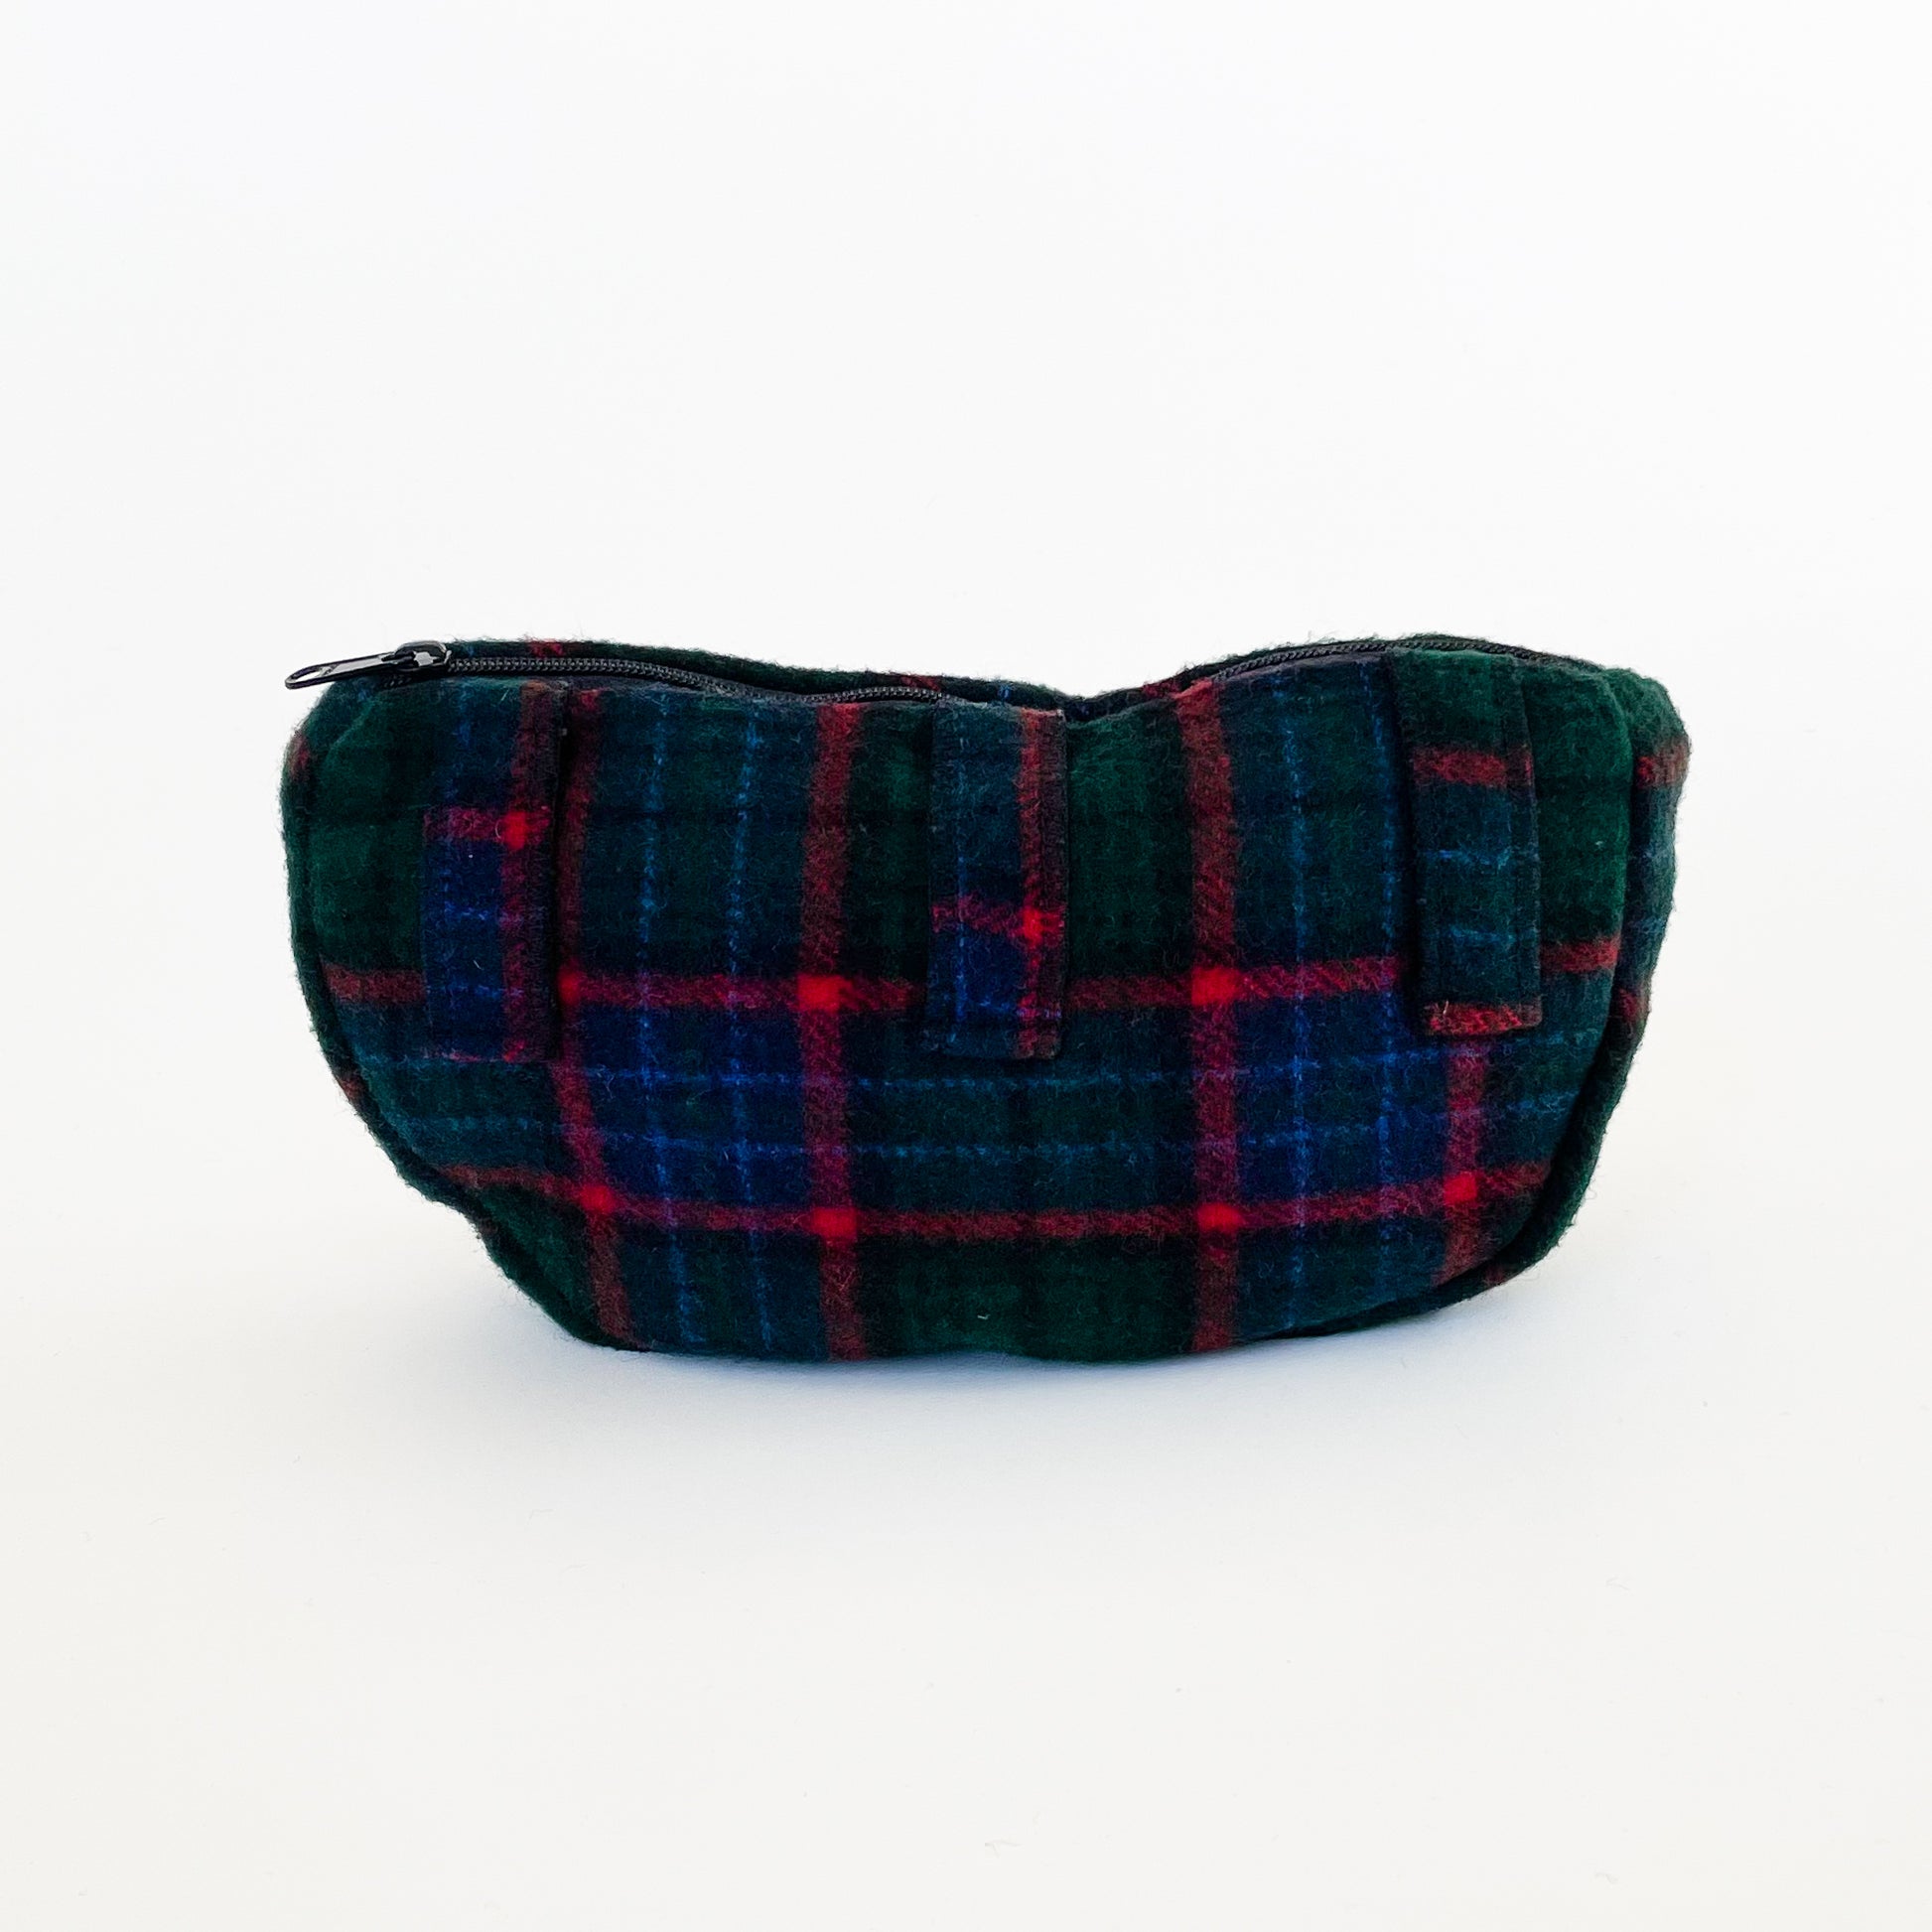 Wool sidewinder - bag with zipped closure and belt loops for wearing on your waist. Shown in green, blue and red plaid, back view